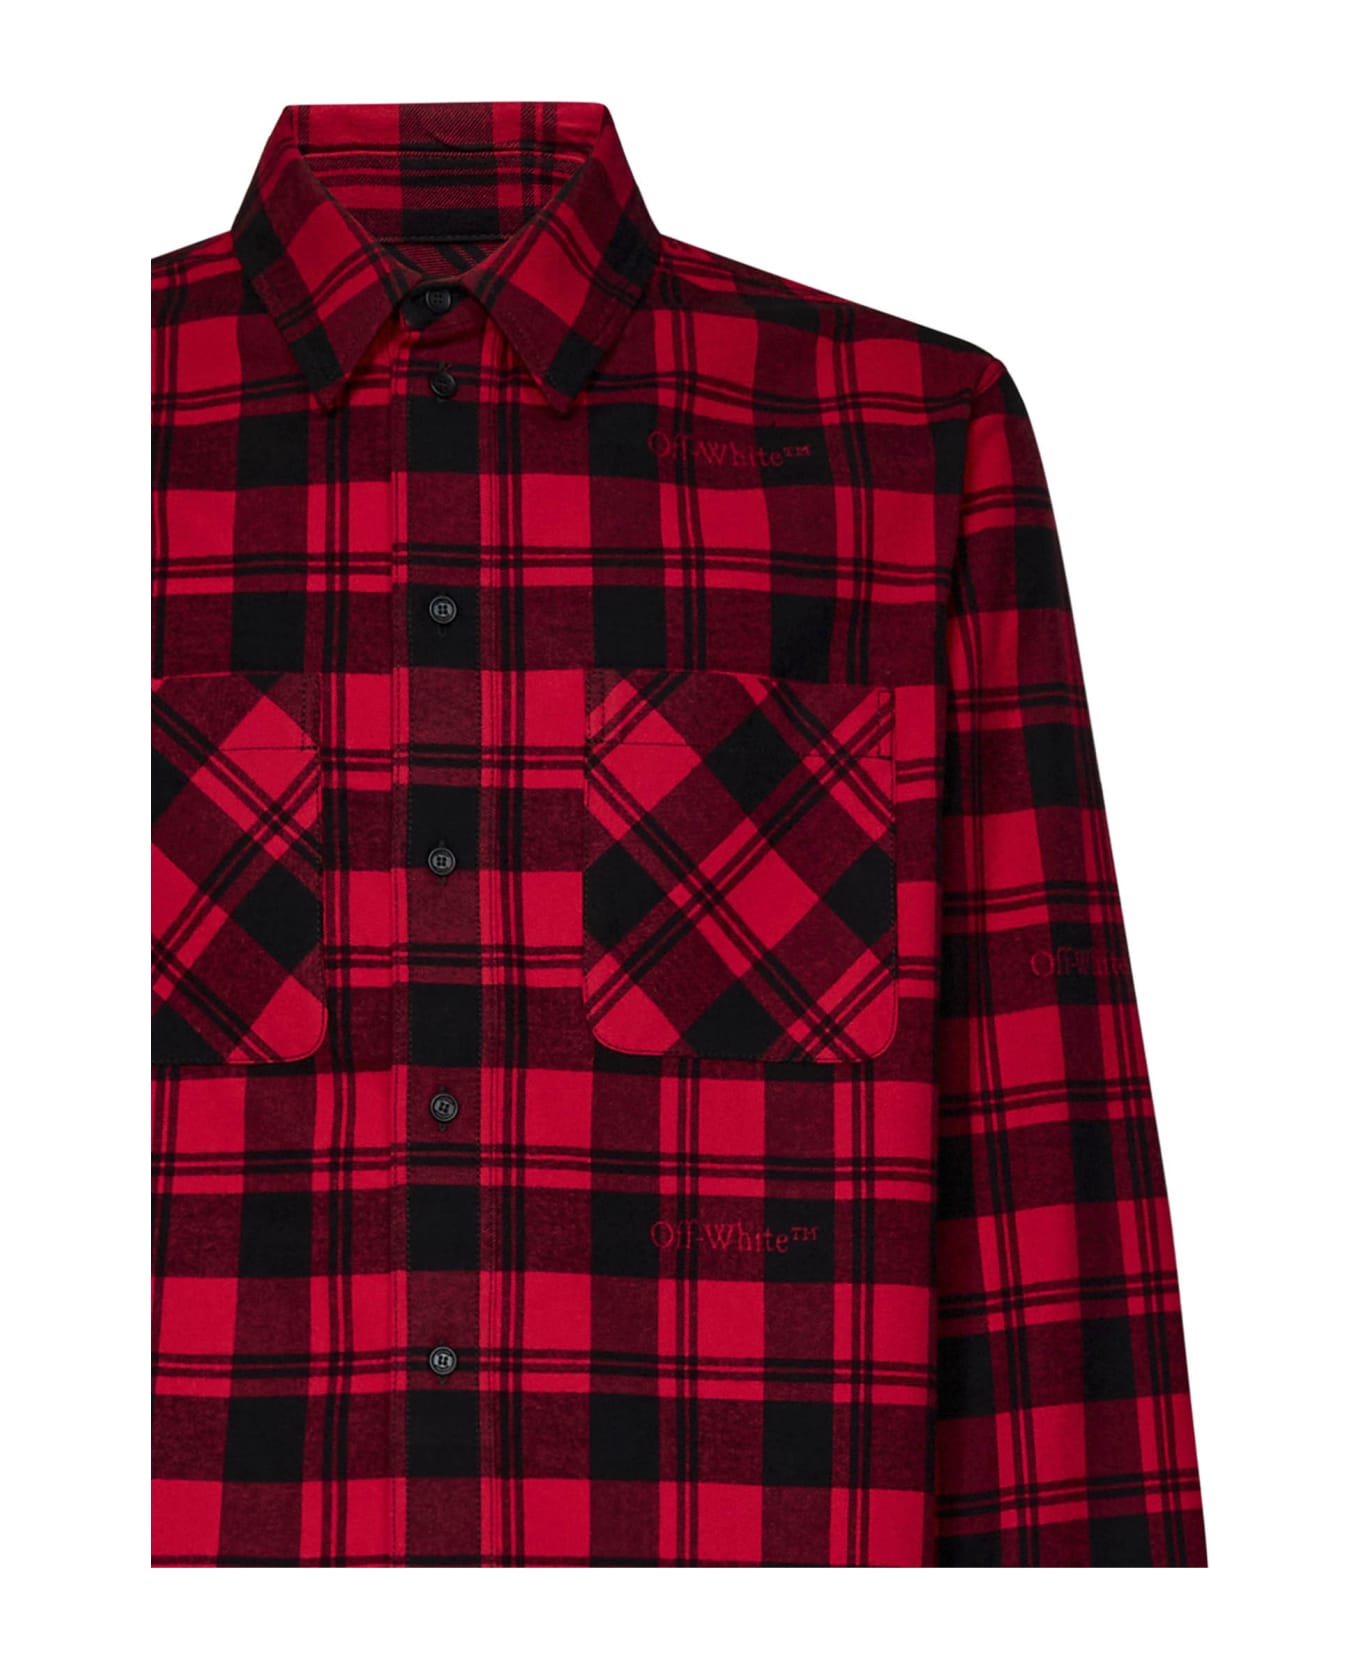 Off-White Shirt - Red